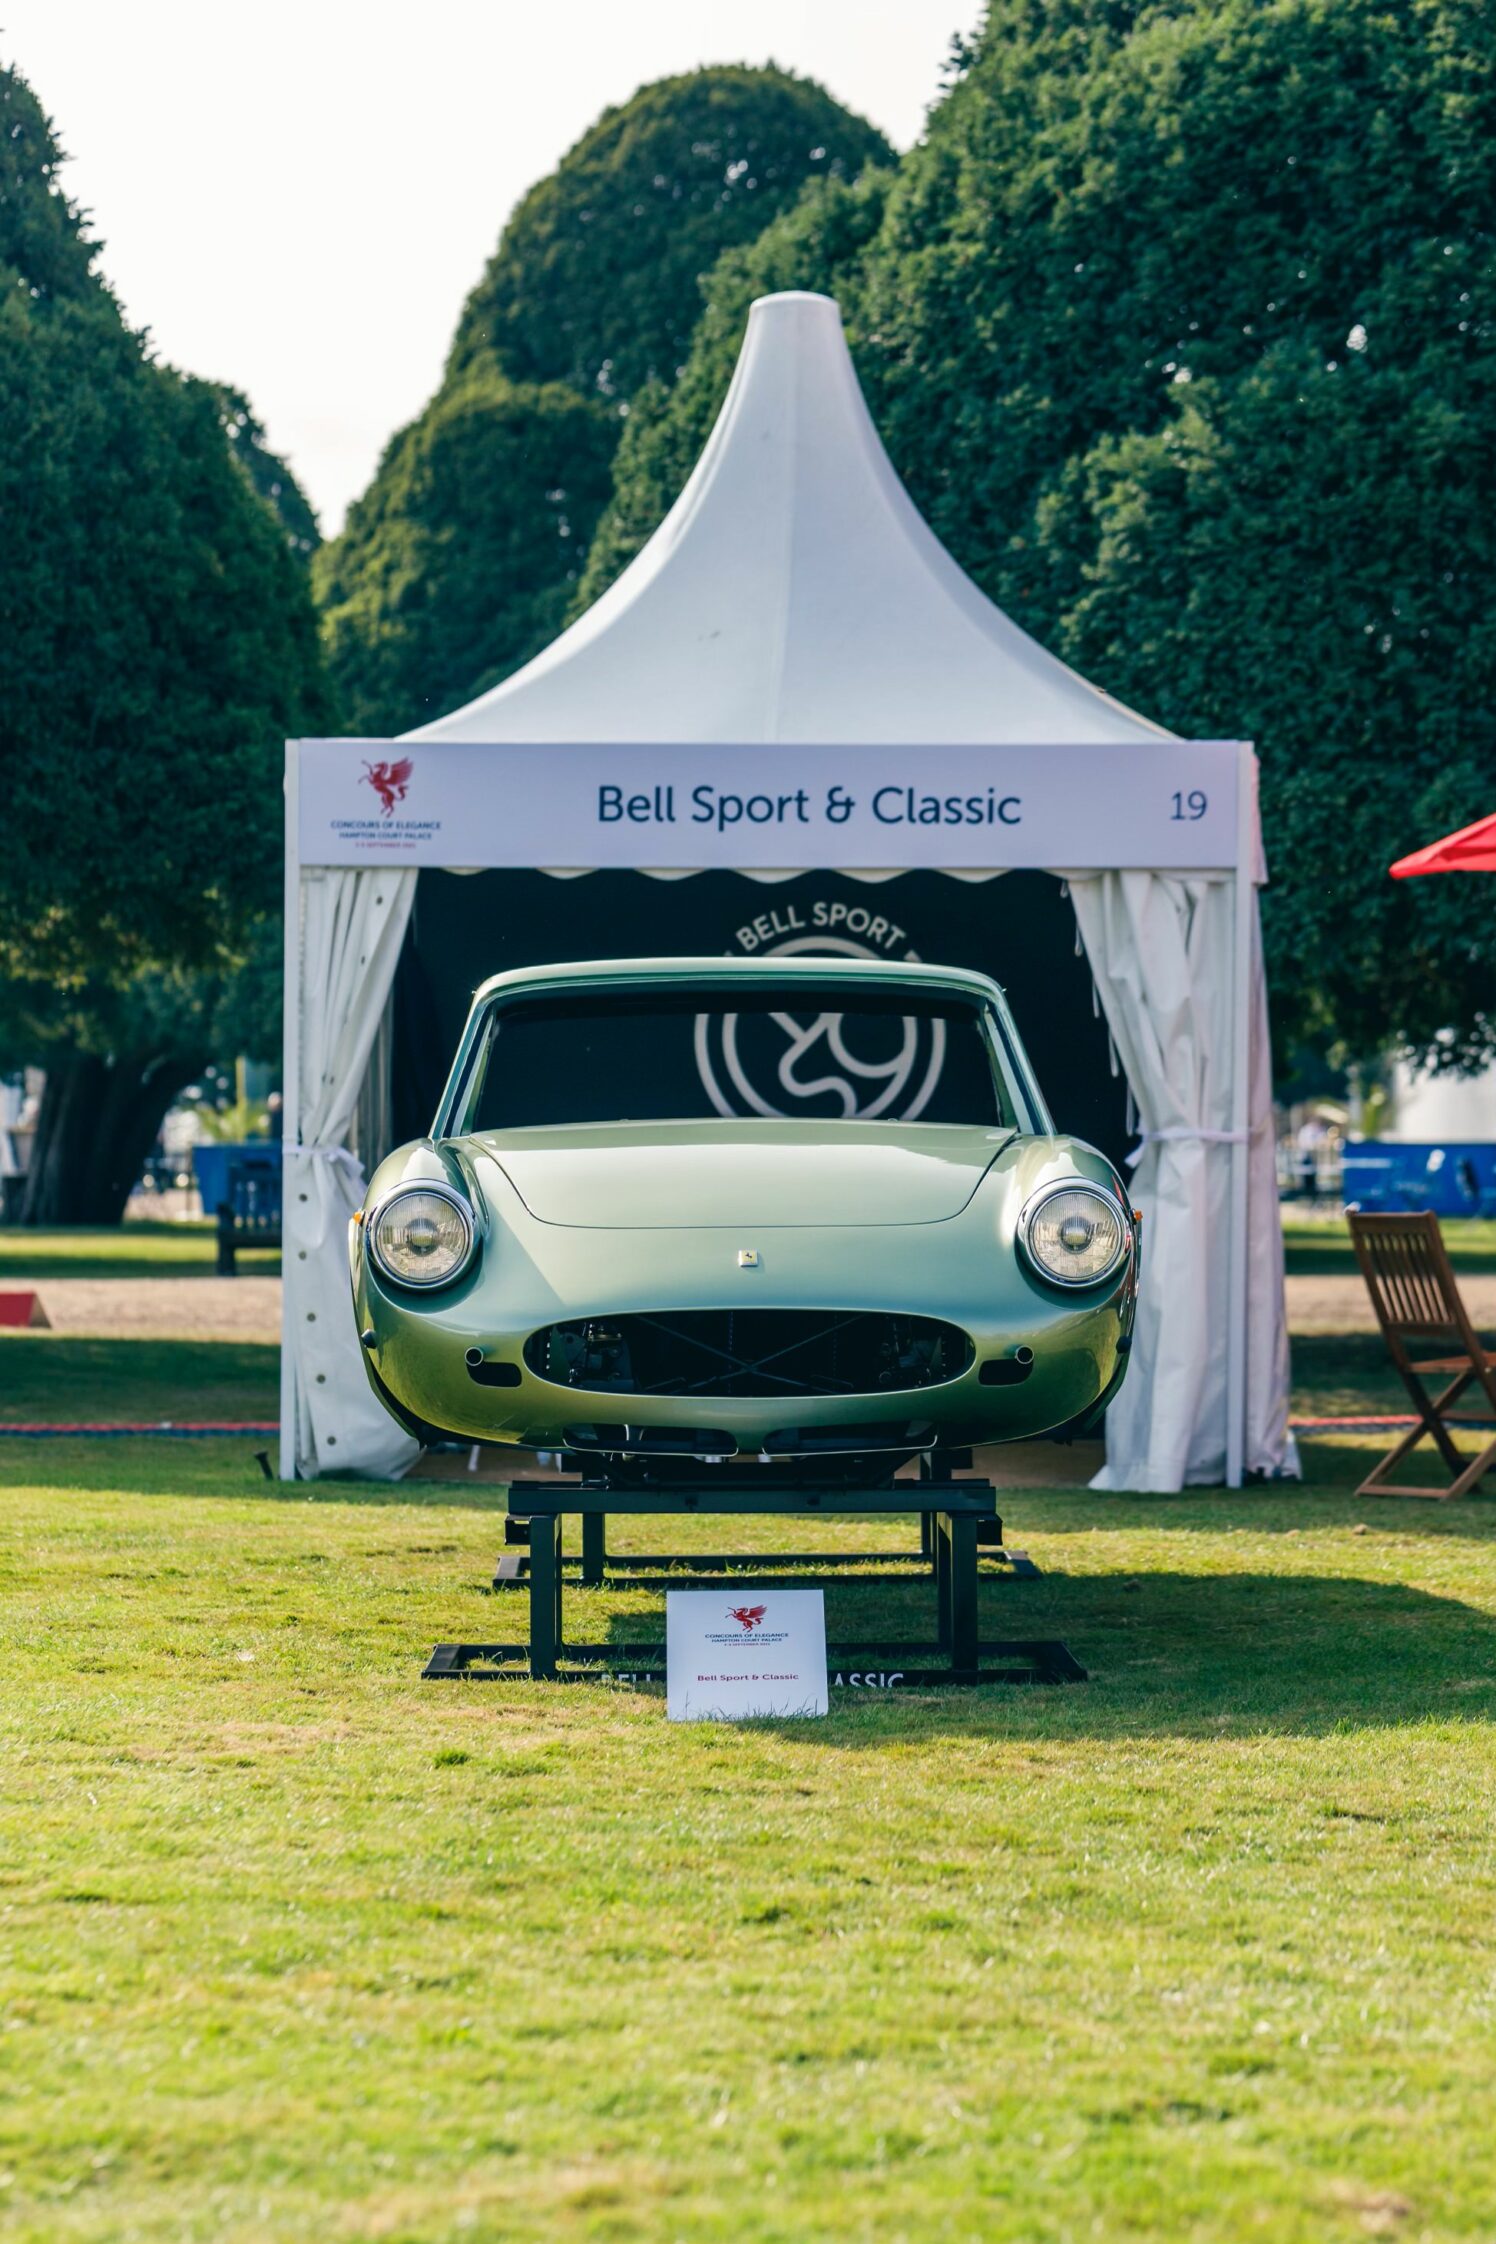 Bell Sport & Classic at Concours of Elegance